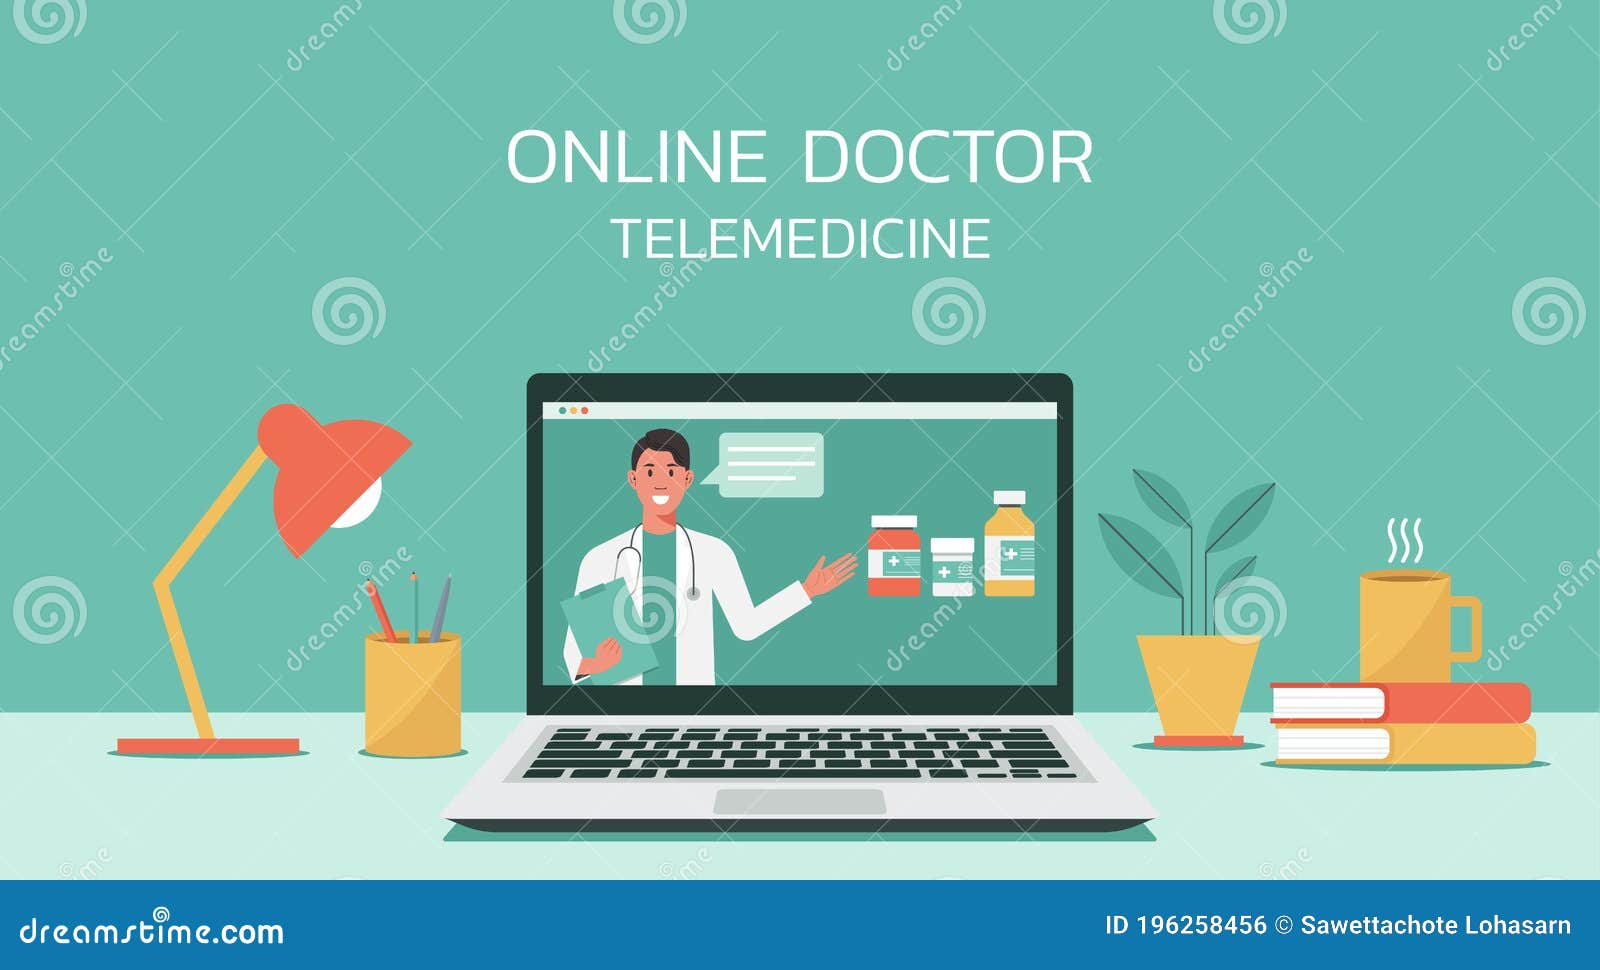 virtual doctor describe about benefit of medicines on laptop